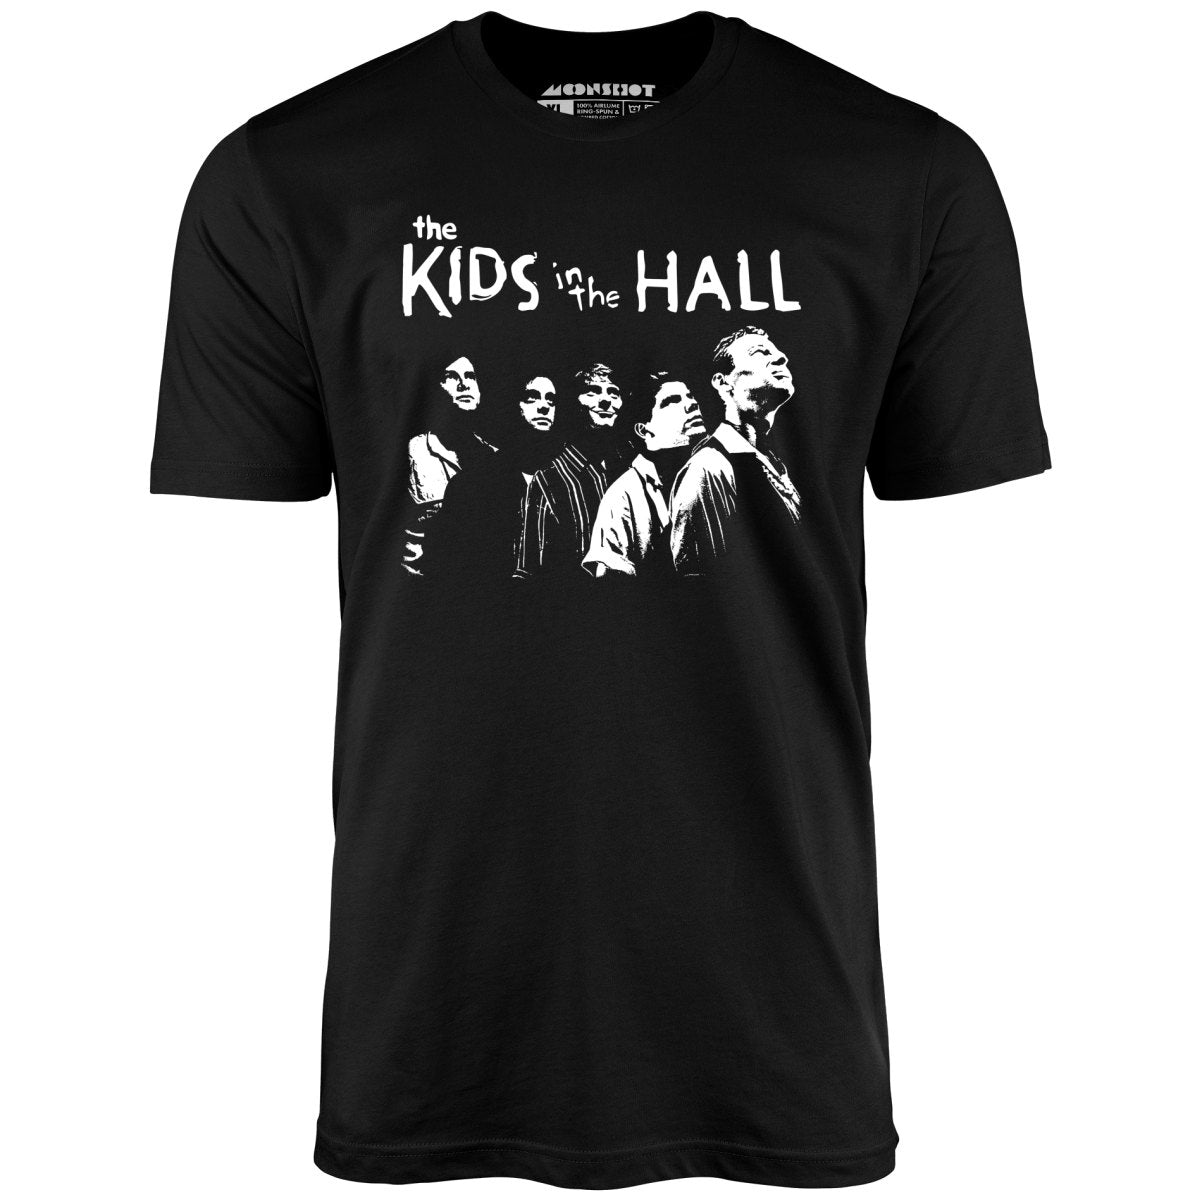 The Kids in The Hall - Unisex T-Shirt